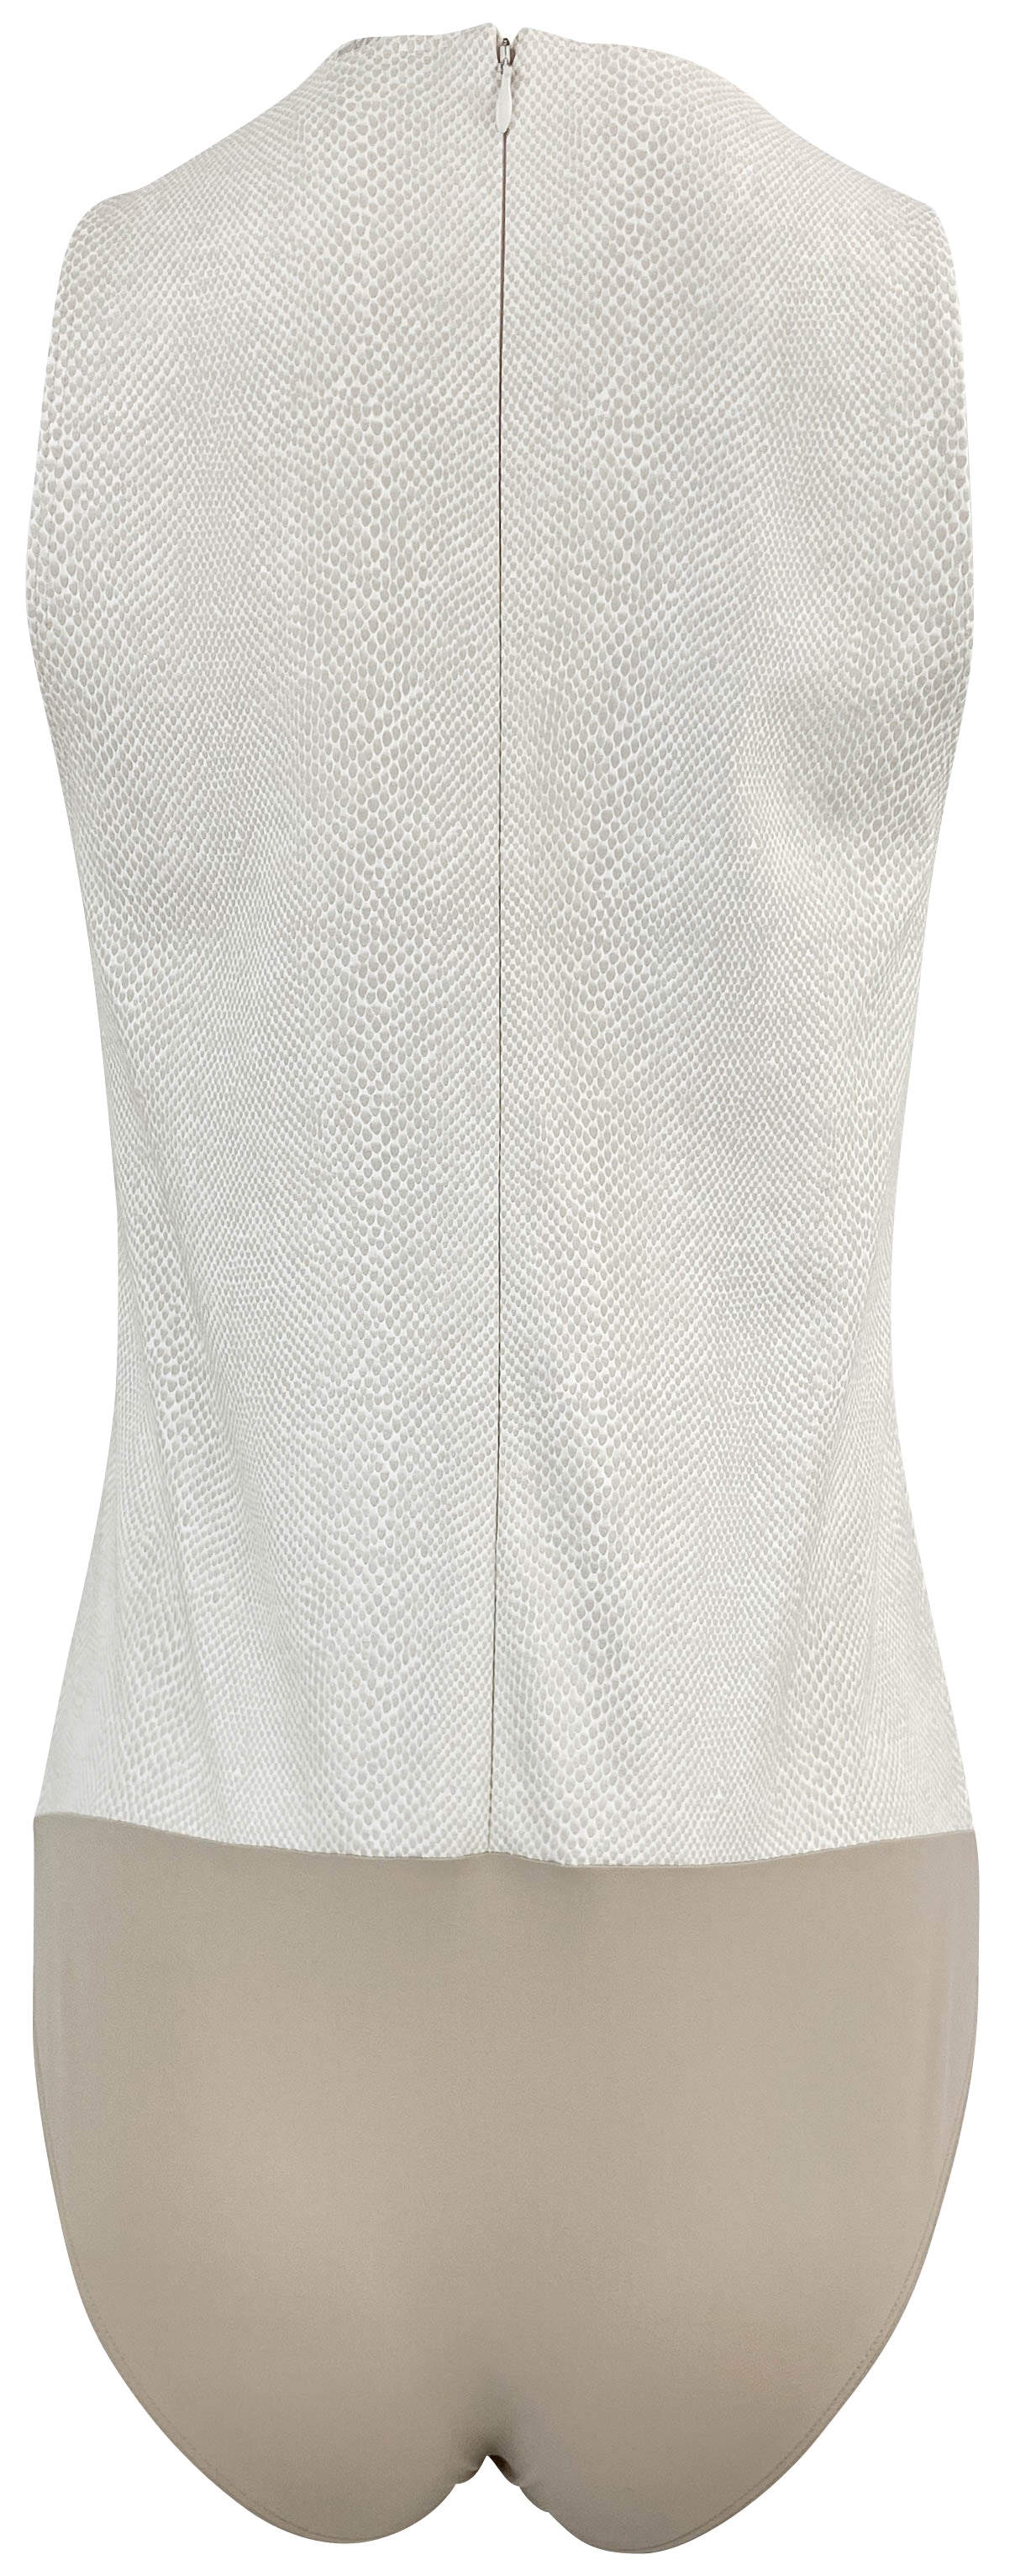 LAPOINTE Faux Leather Bodysuit in Cream - Discounts on LaPointe at UAL